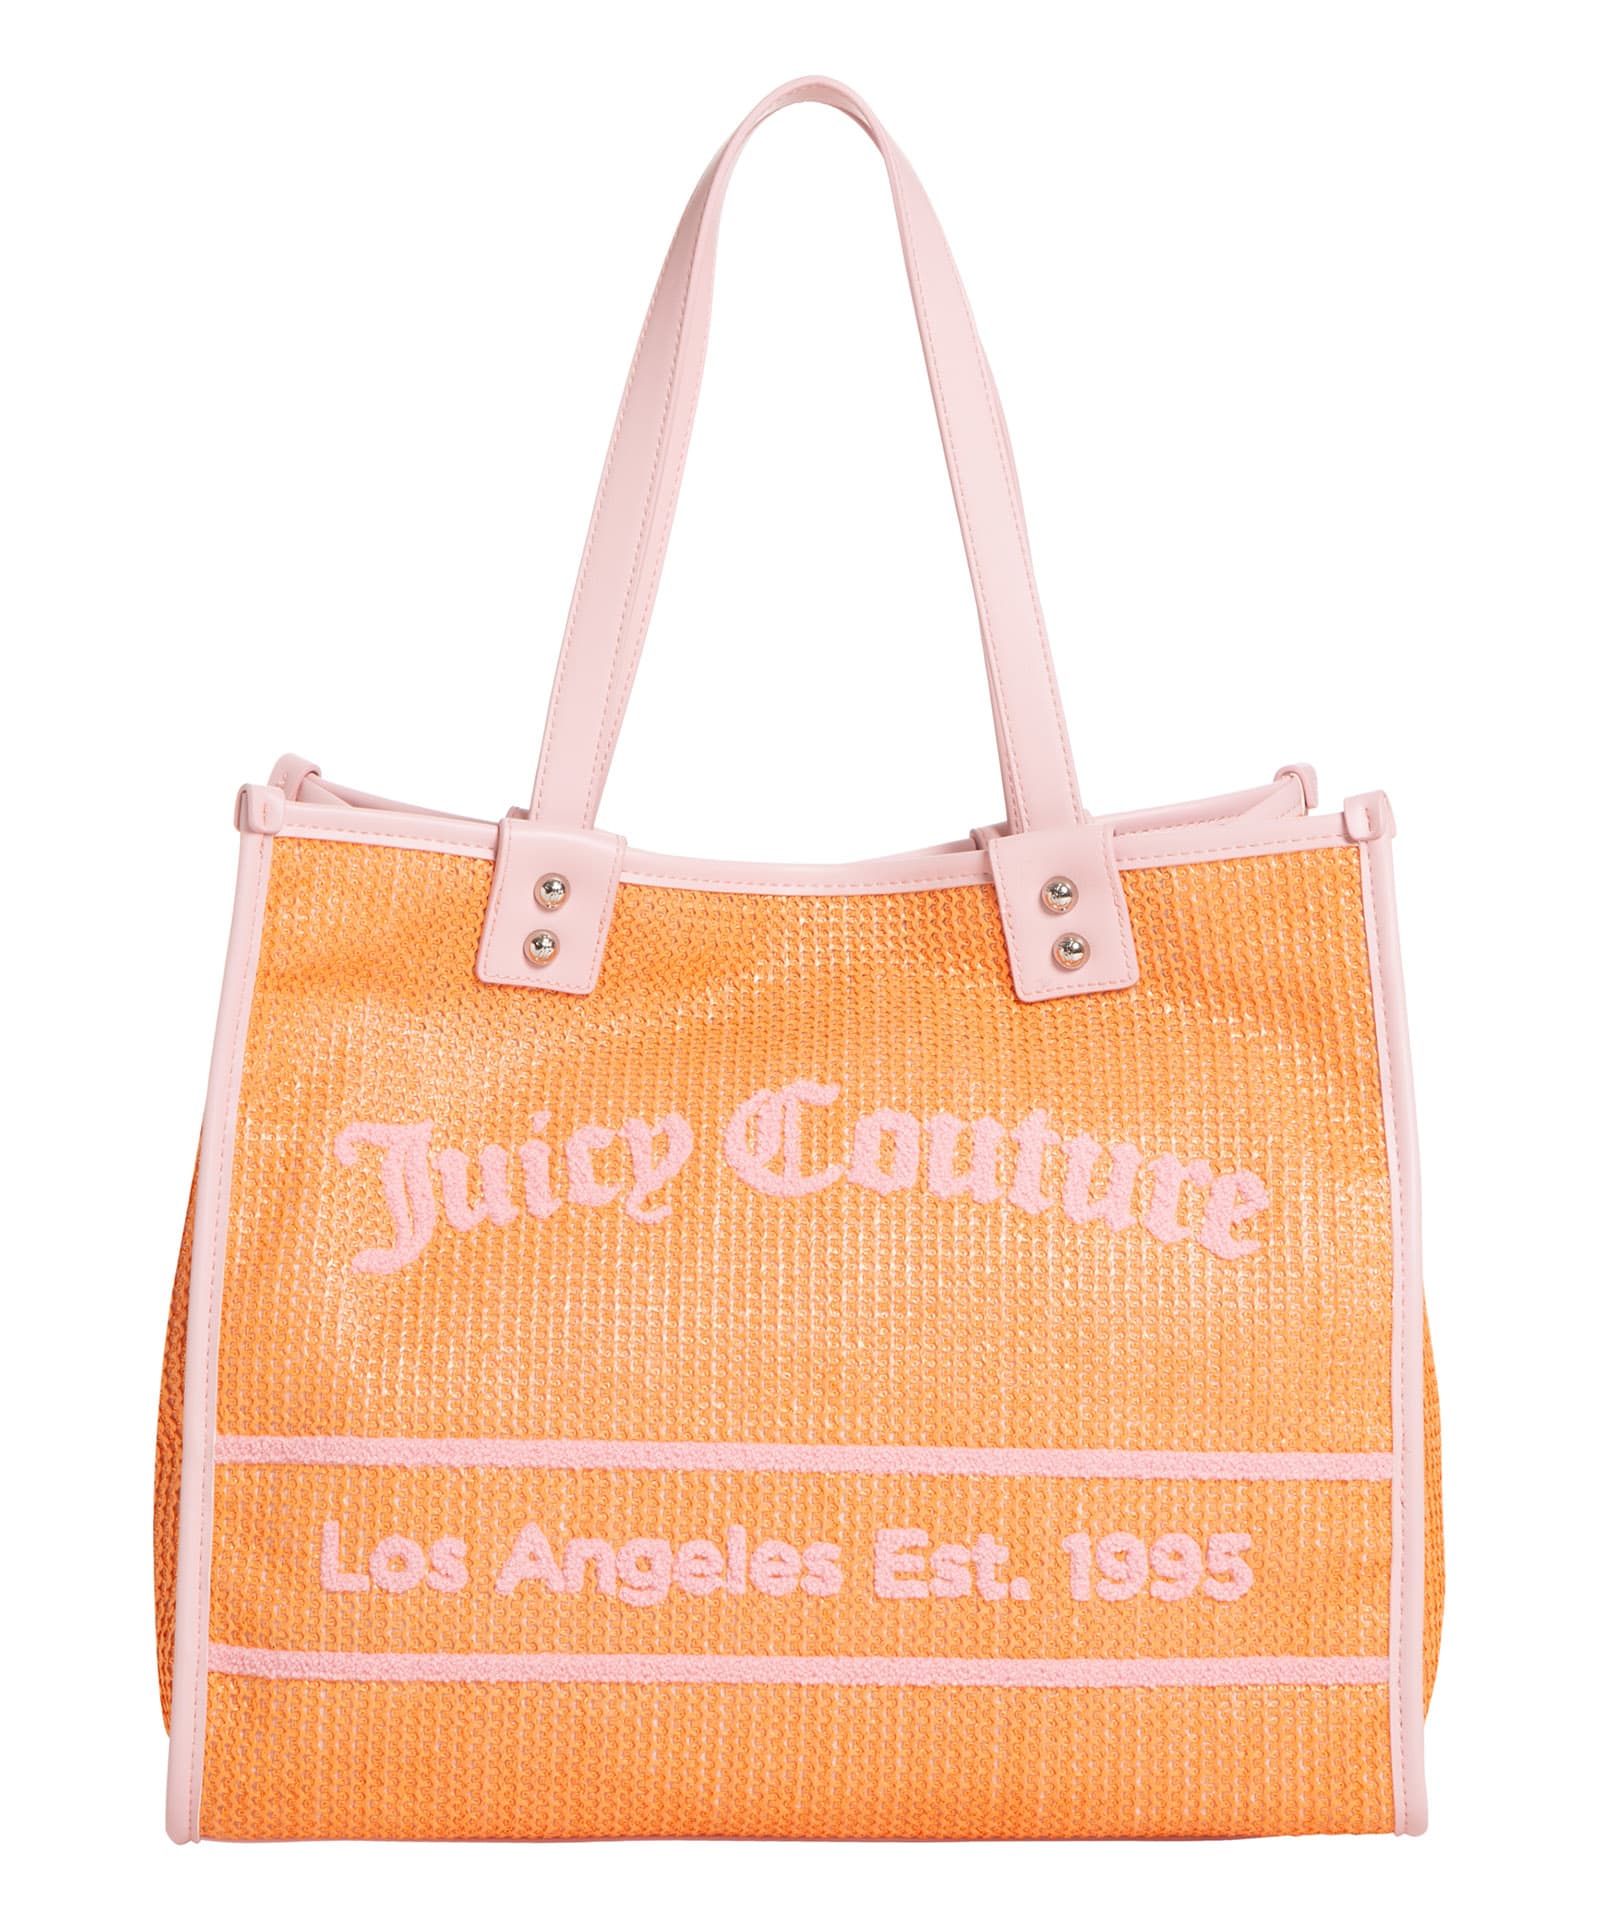 Juicy Couture Tote Bag